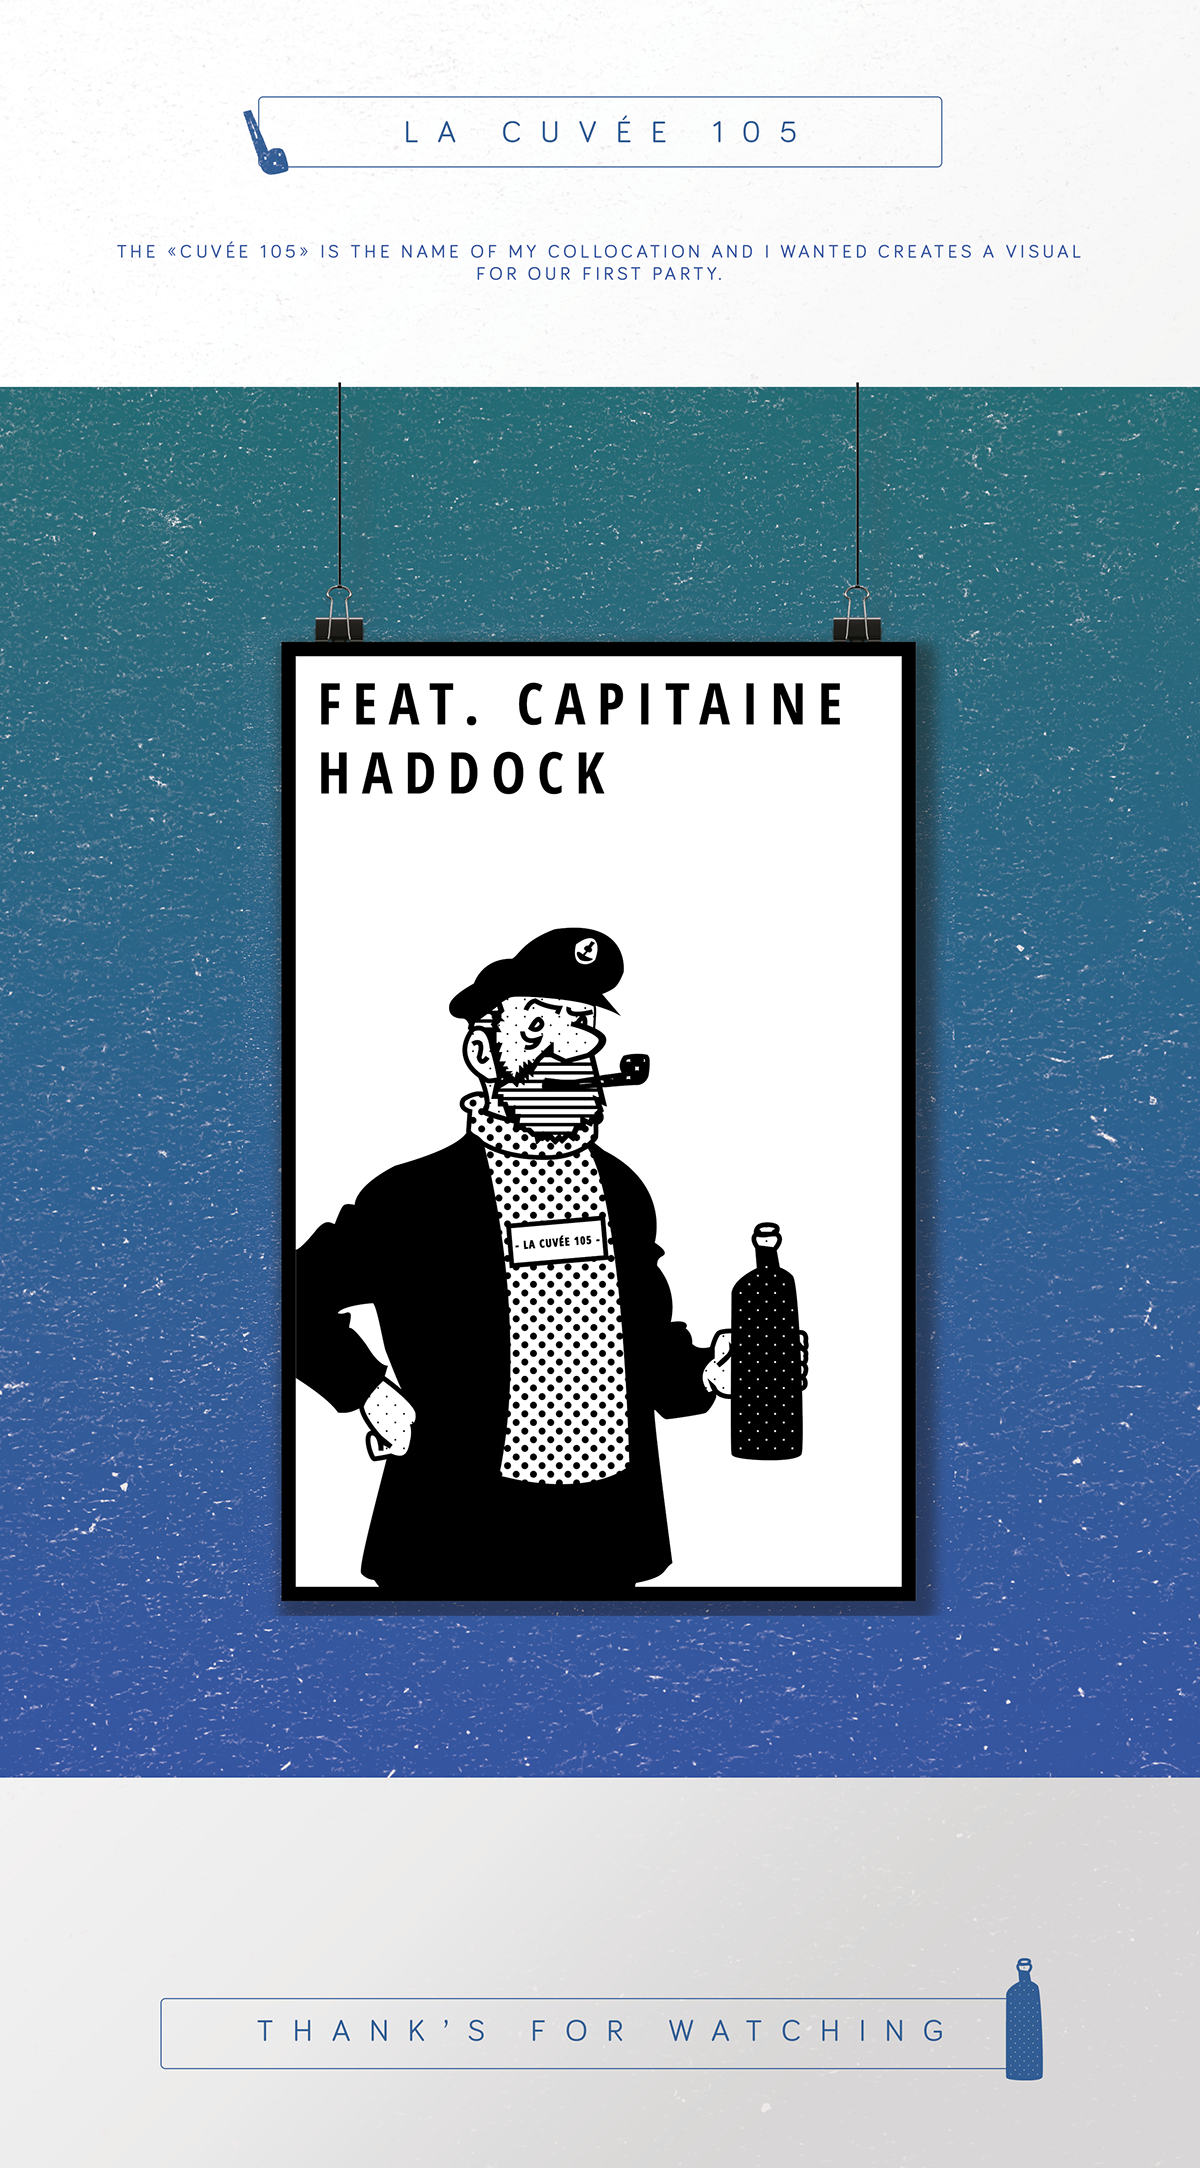 capitaine haddock tintin Herge design graphique party bd bande dessinée pattern pois black and white wine soirée haddock print poster